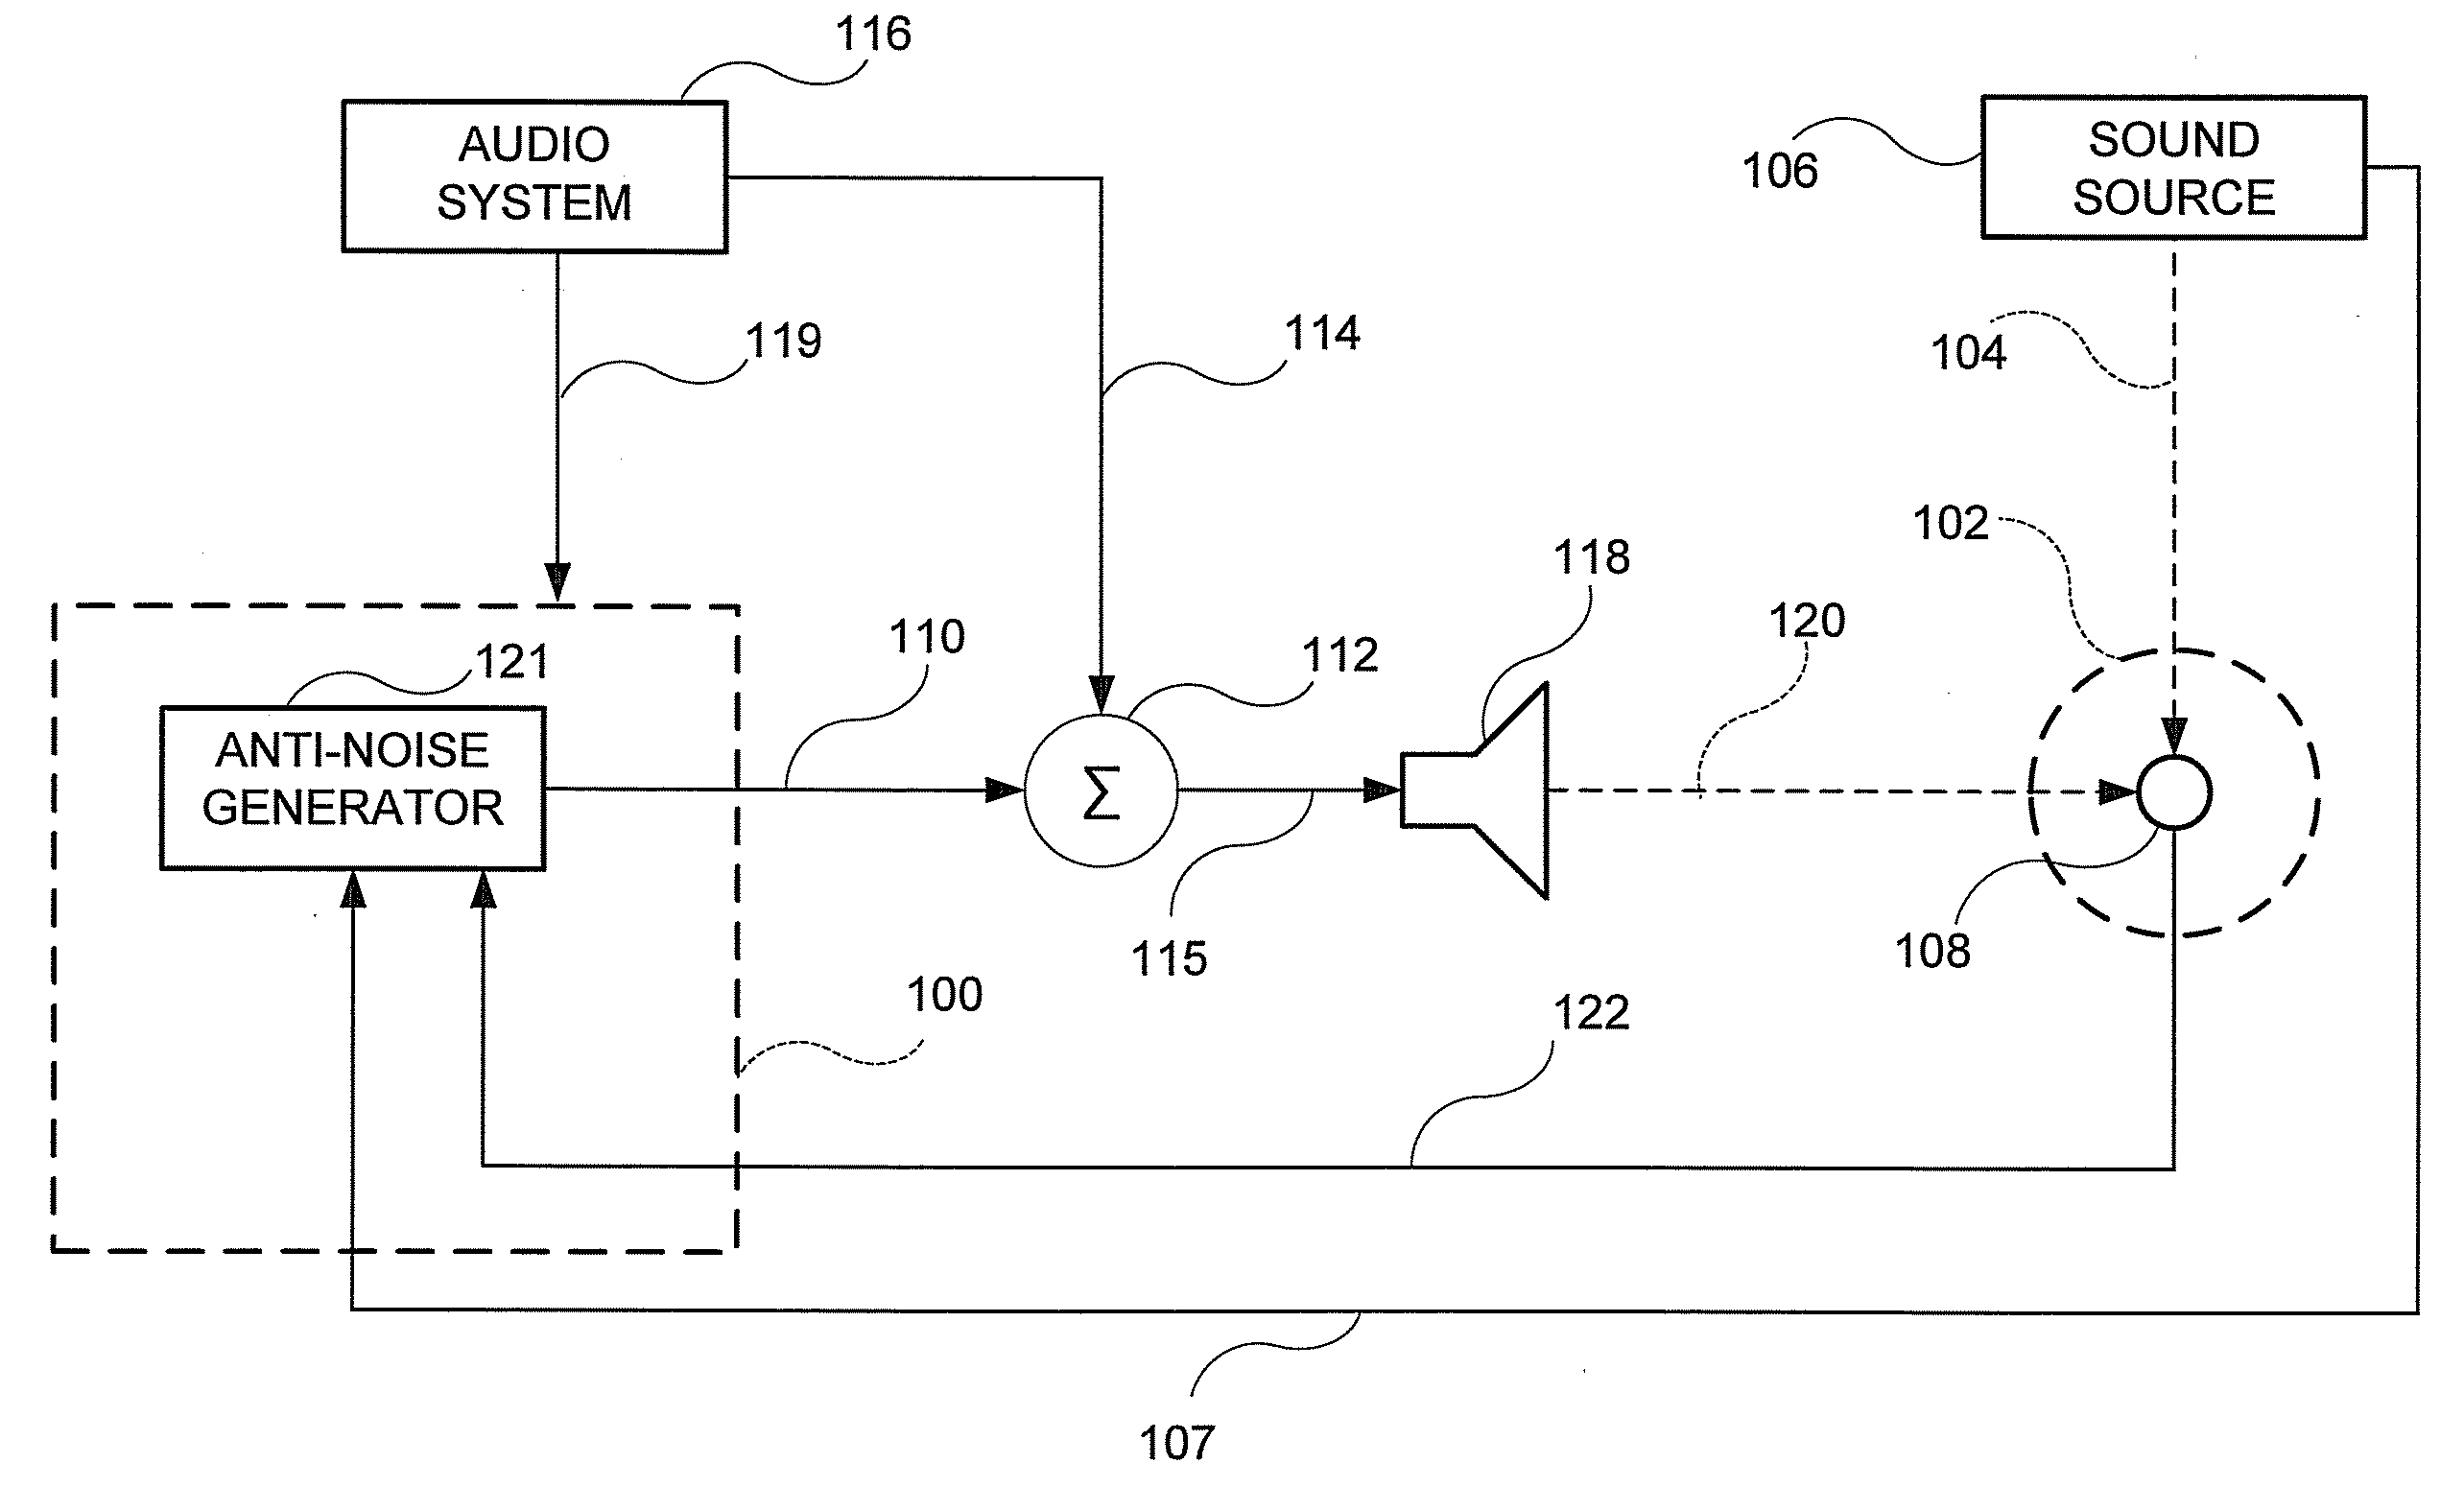 System for active noise control based on audio system output